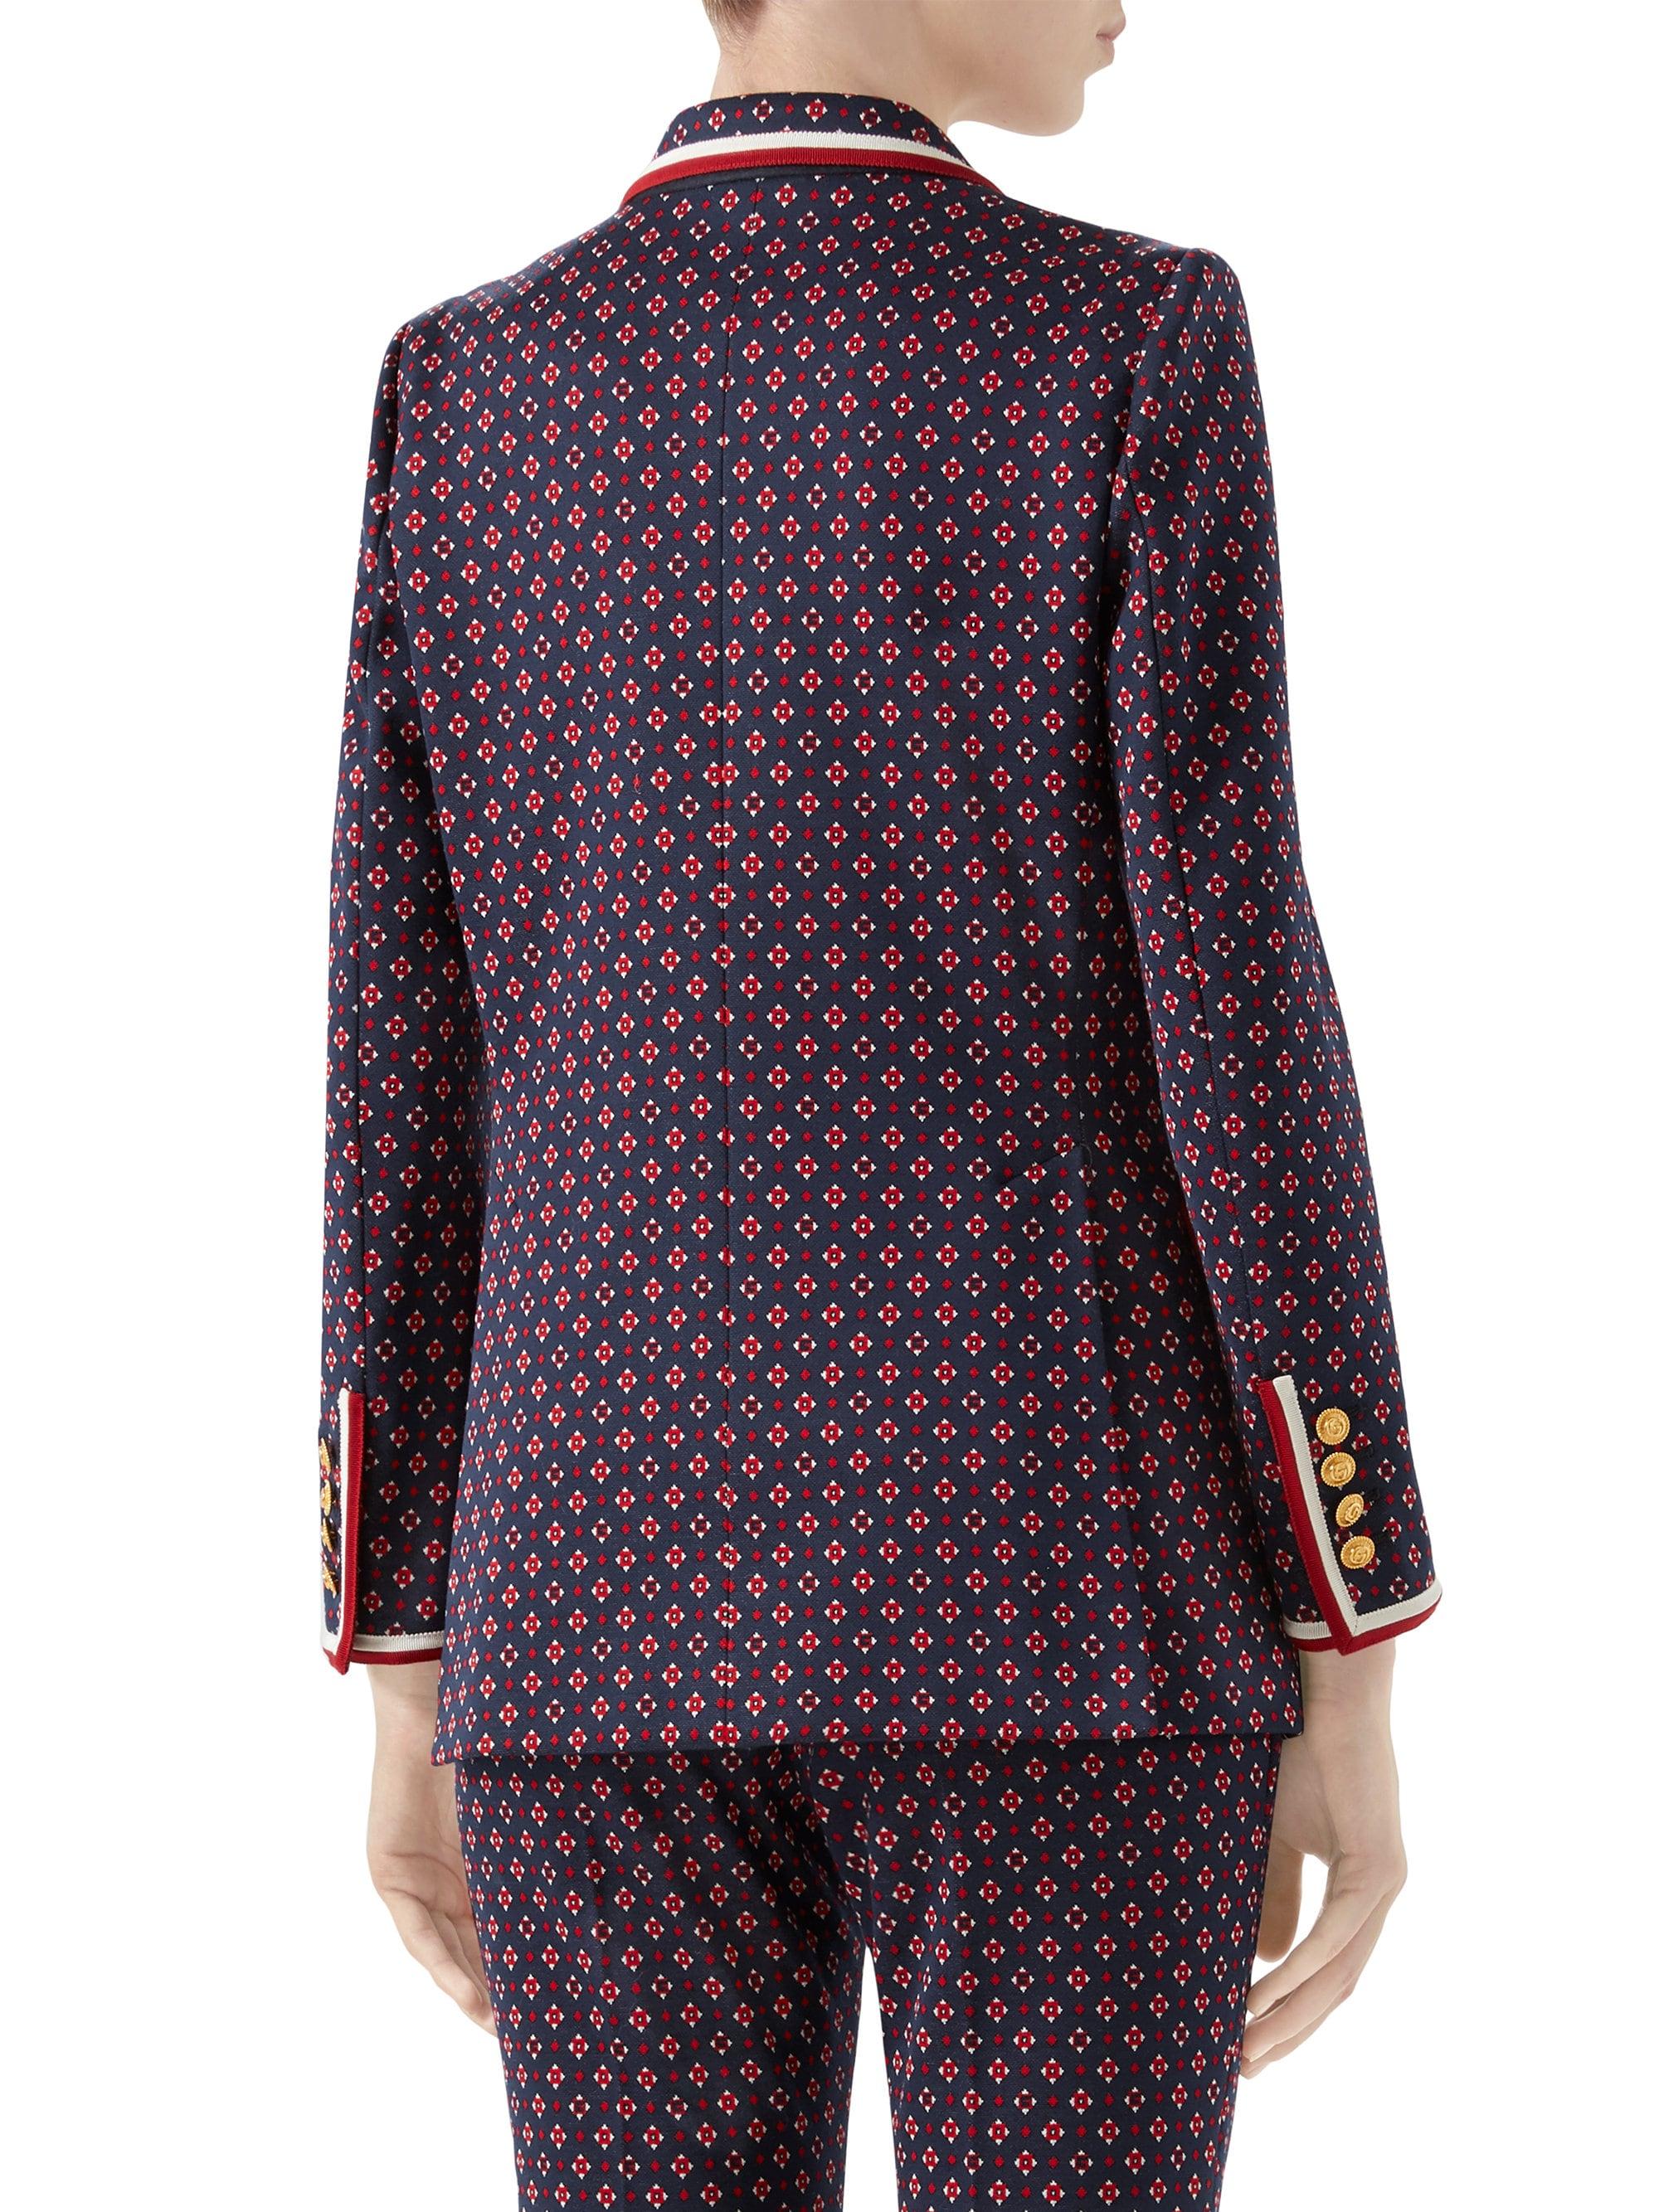 Gucci Geometric G Iconic Jersey Jacket in Blue - Lyst